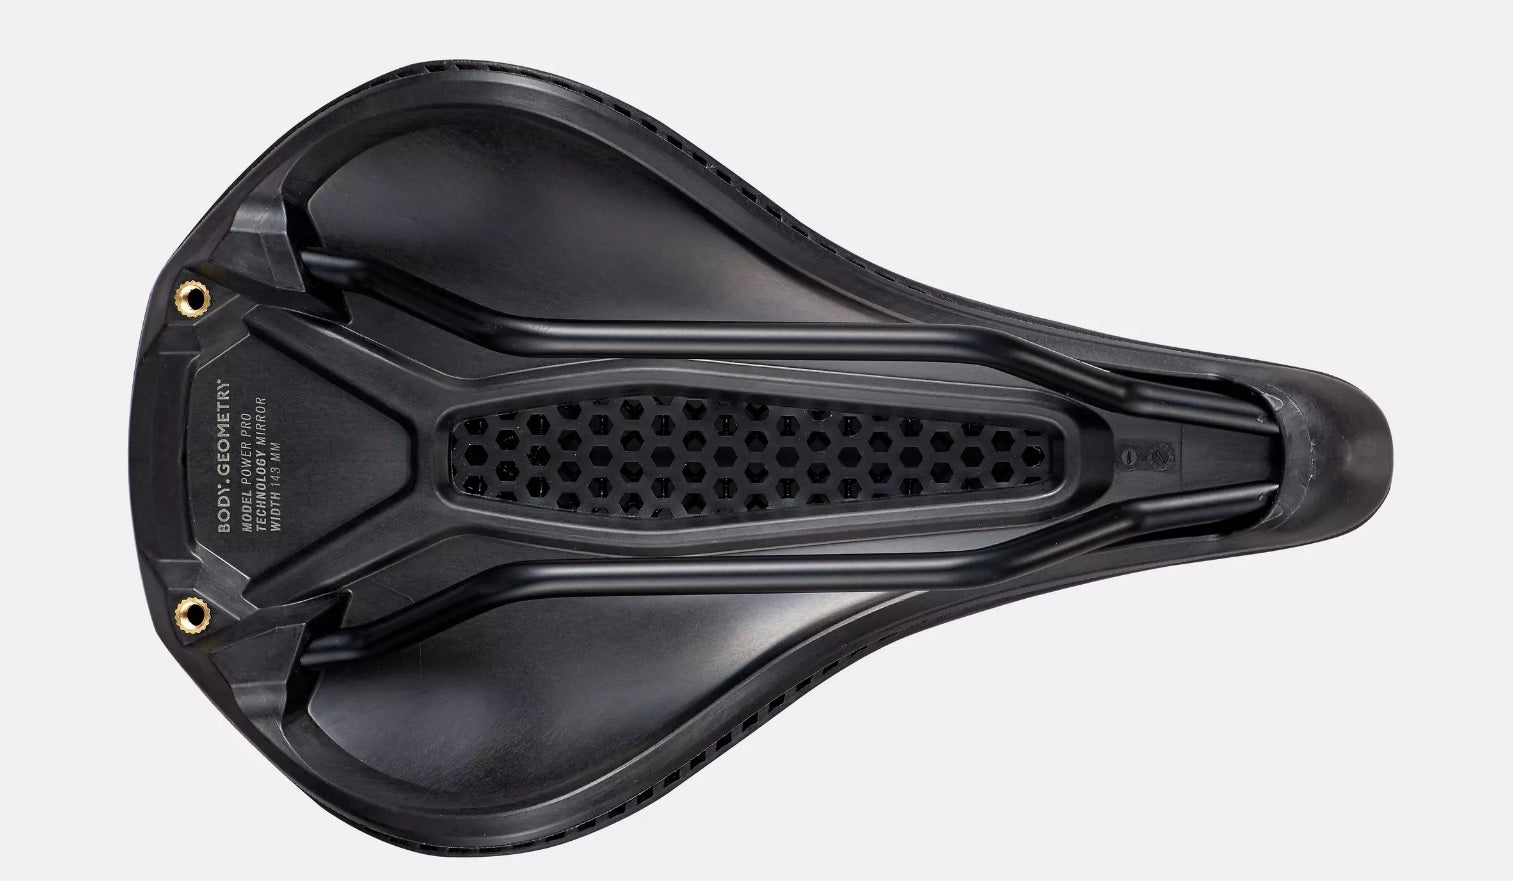 Specialized Power Pro with Mirror Bicycle Saddle